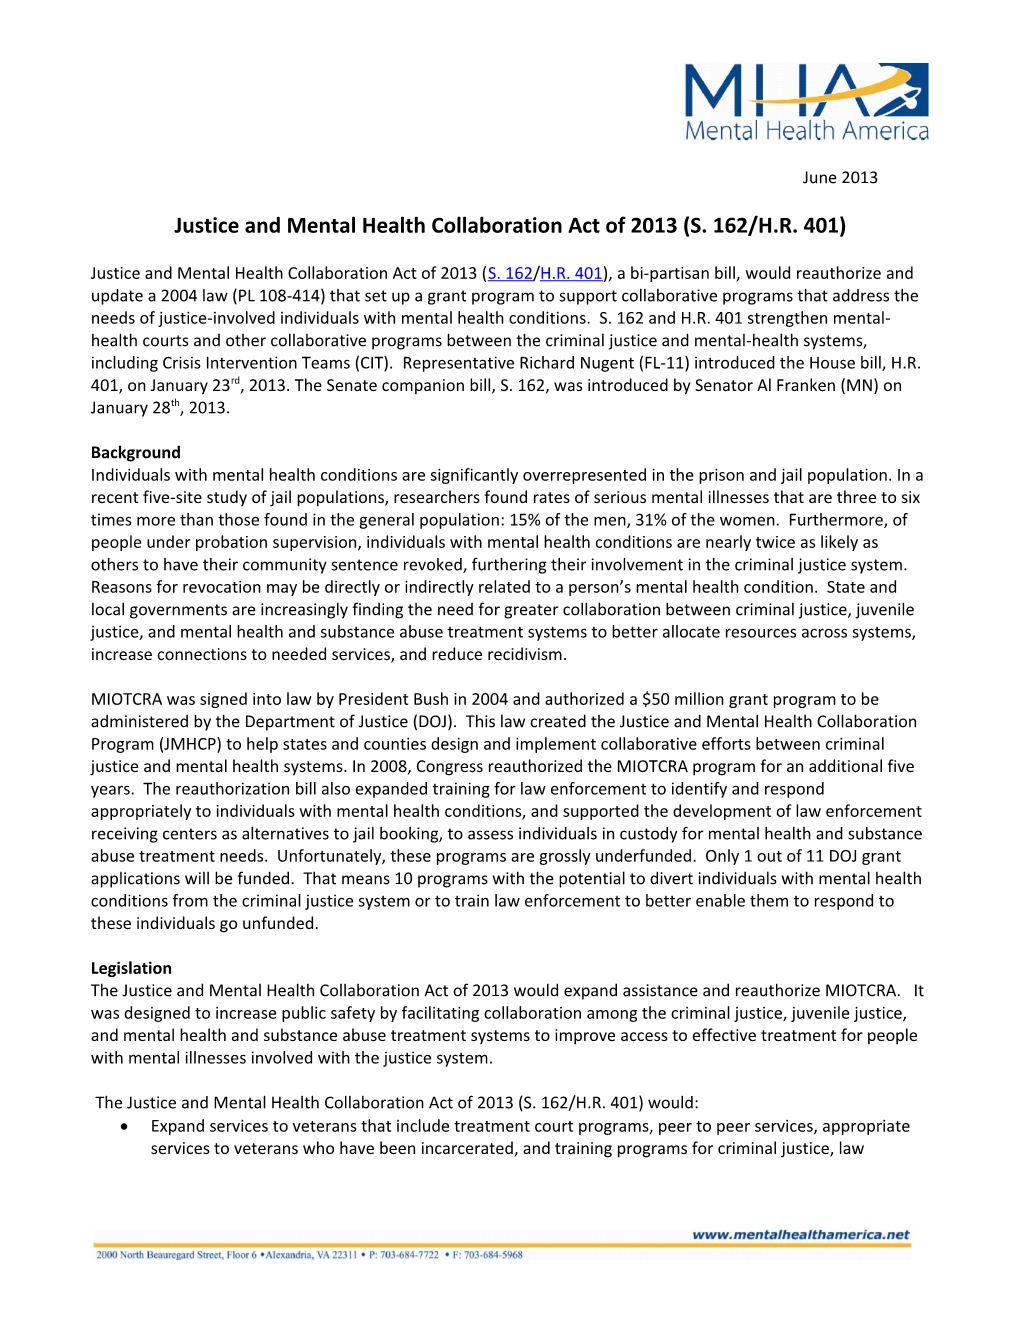 Justice and Mental Health Collaboration Act of 2013 (S. 162/H.R. 401)